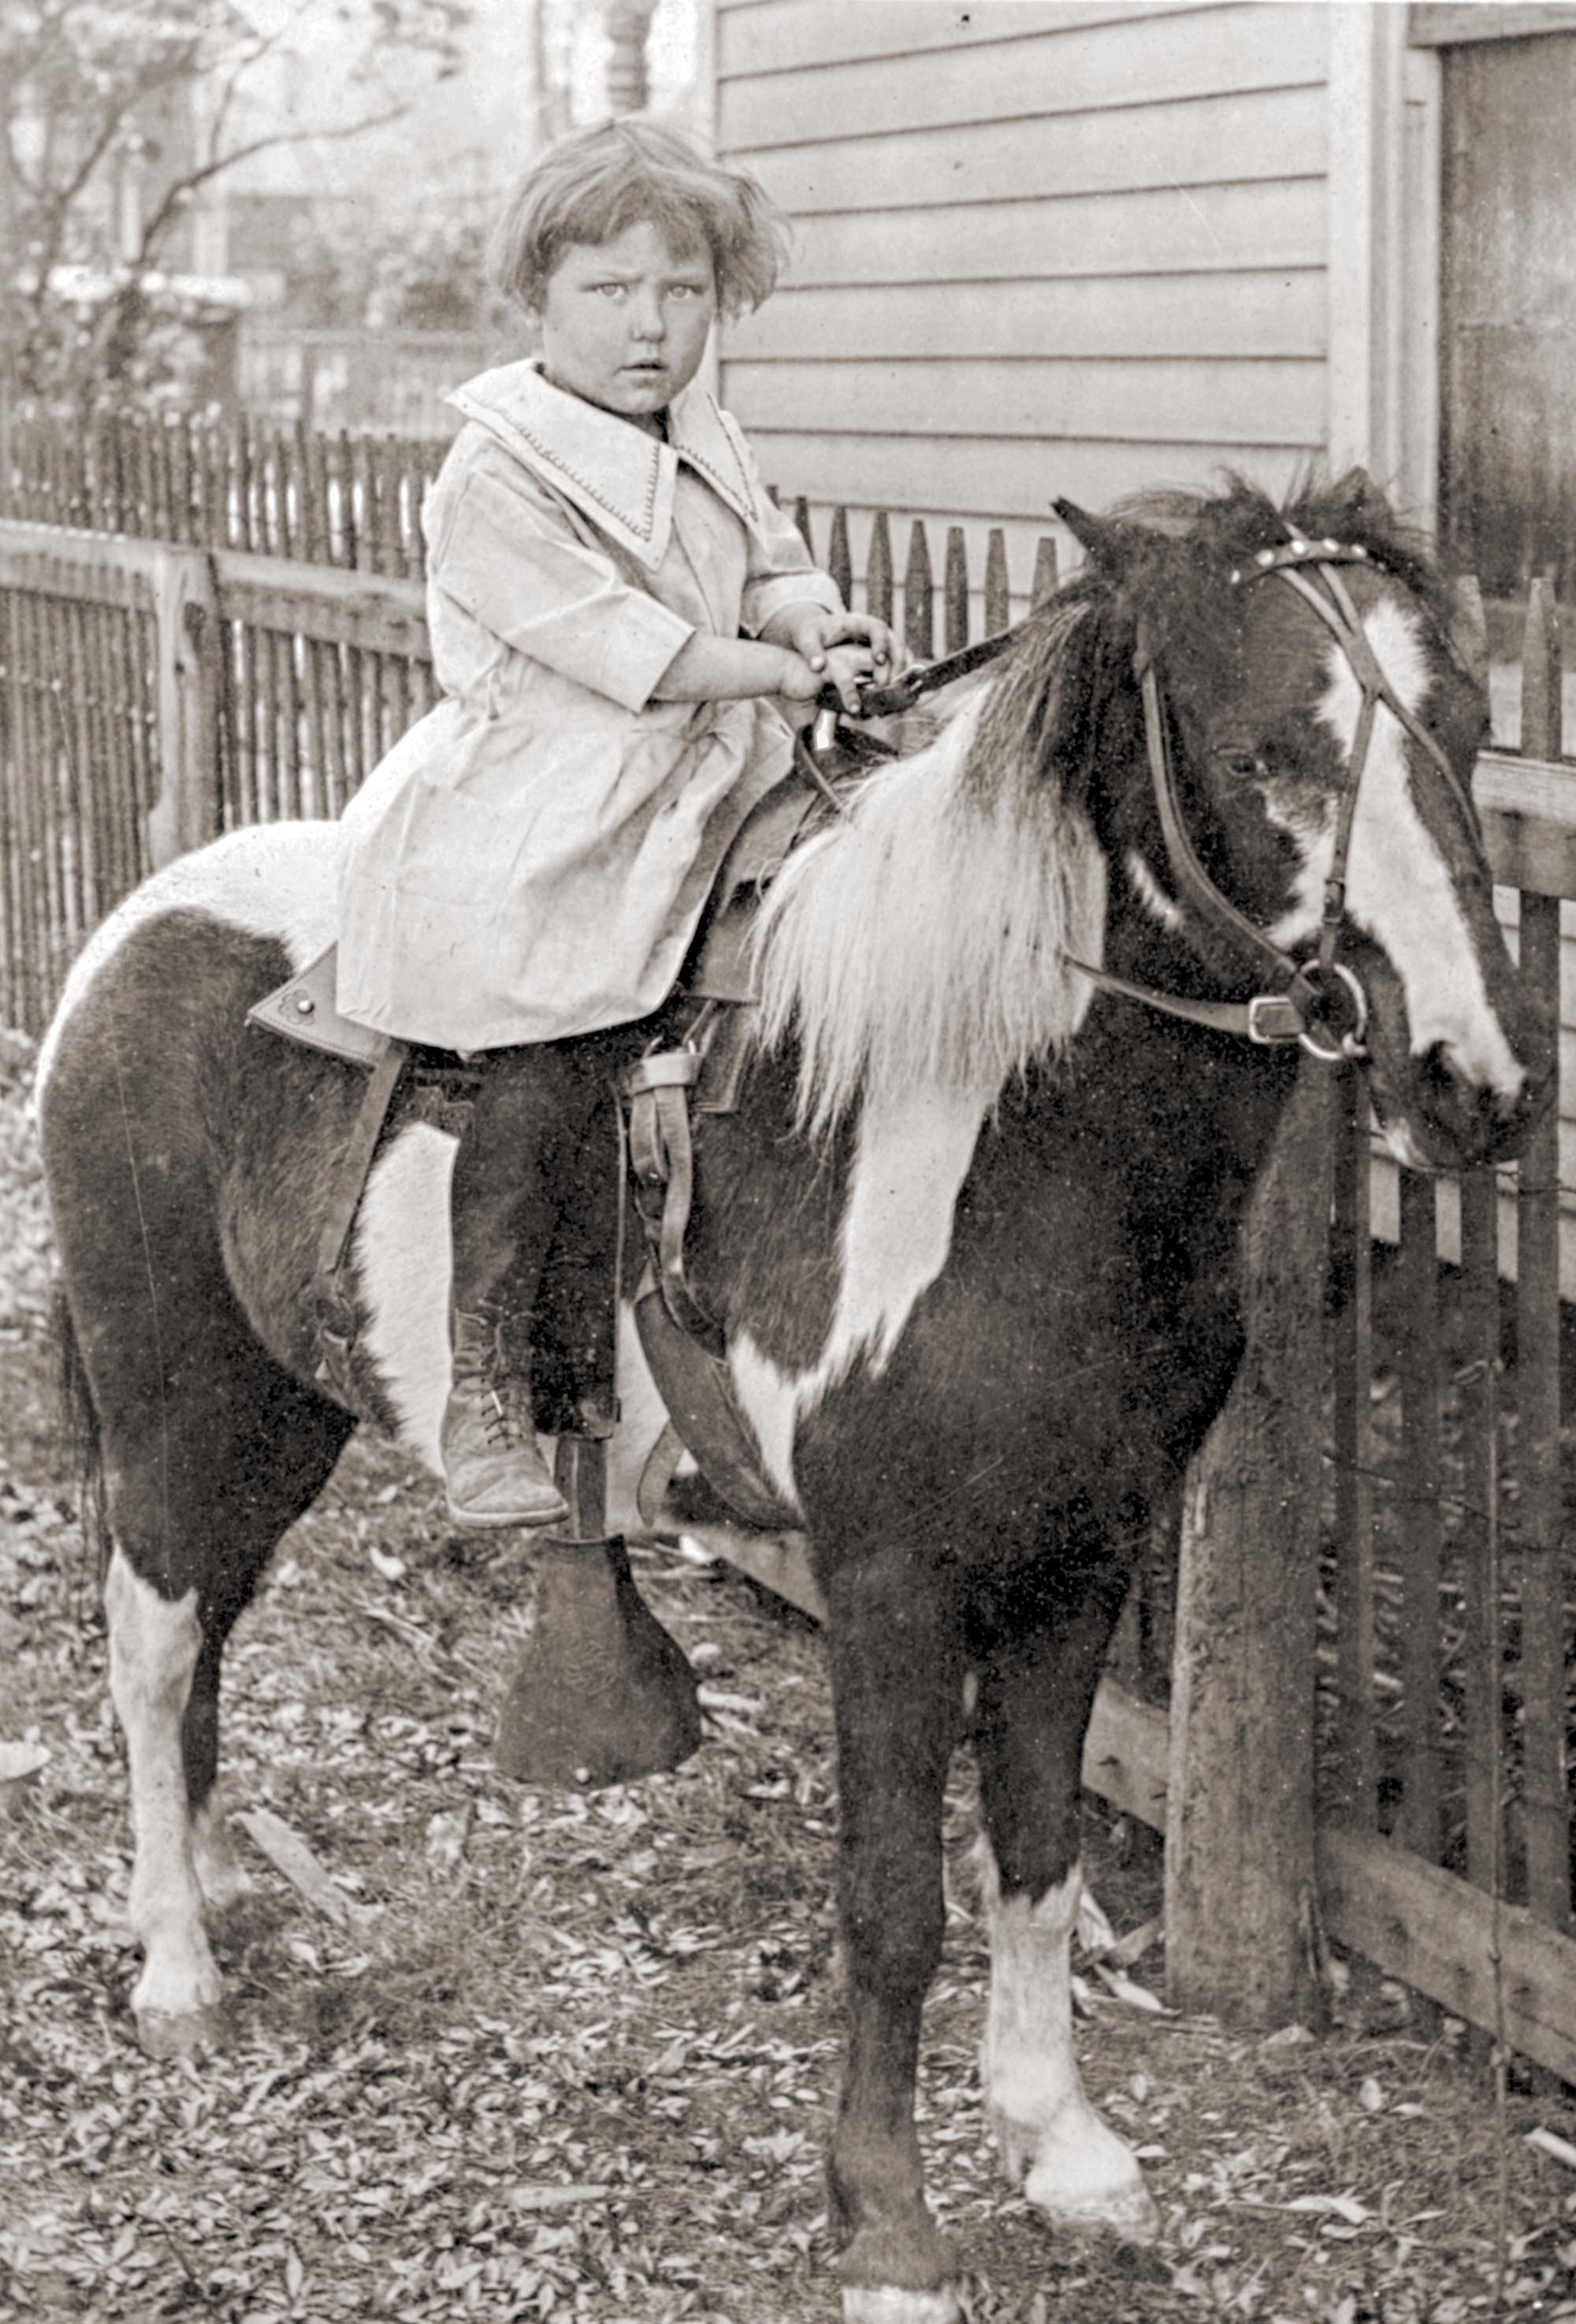 Mary Gillespie from Cambridge, Massachusetts, posing on her pet pony, given on the occasion of her birthday, 1898.